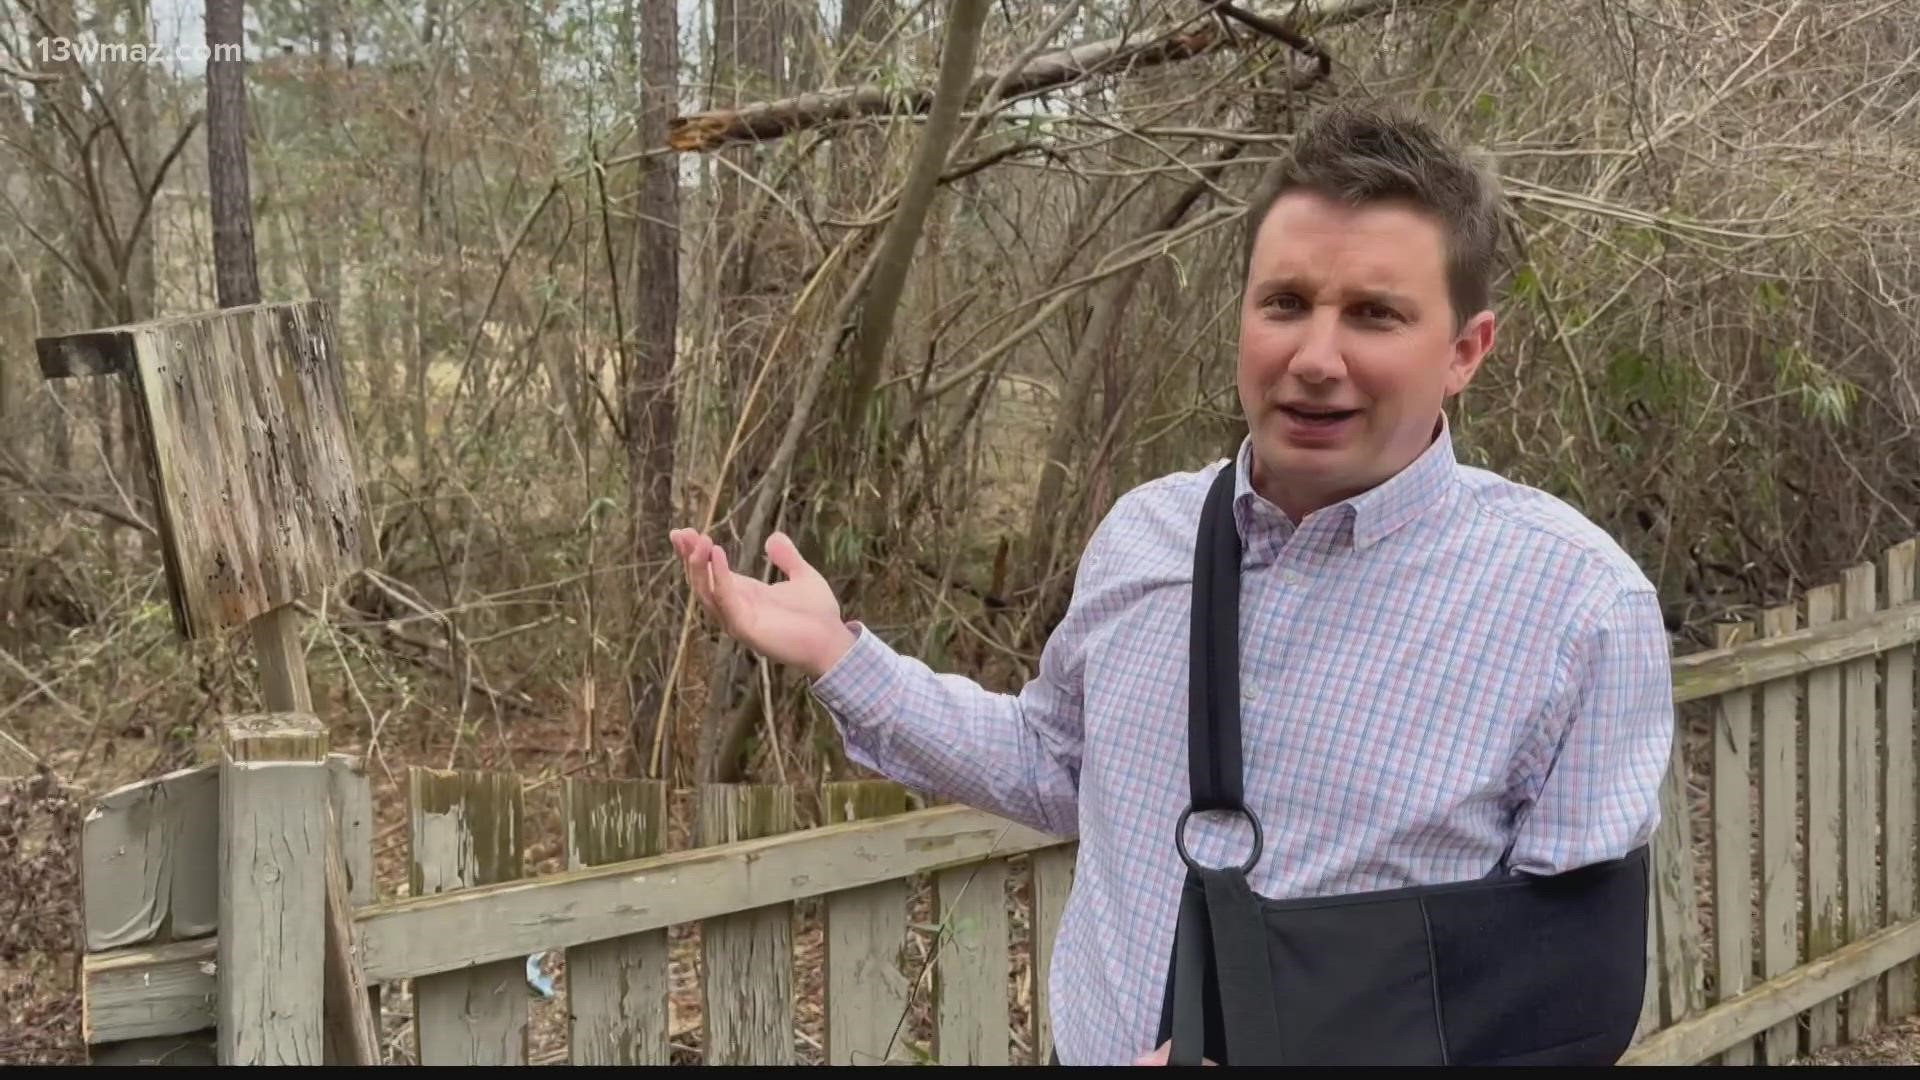 Chief Meteorologist Ben Jones shares his story on his backyard injury and how to safely clear storm debris